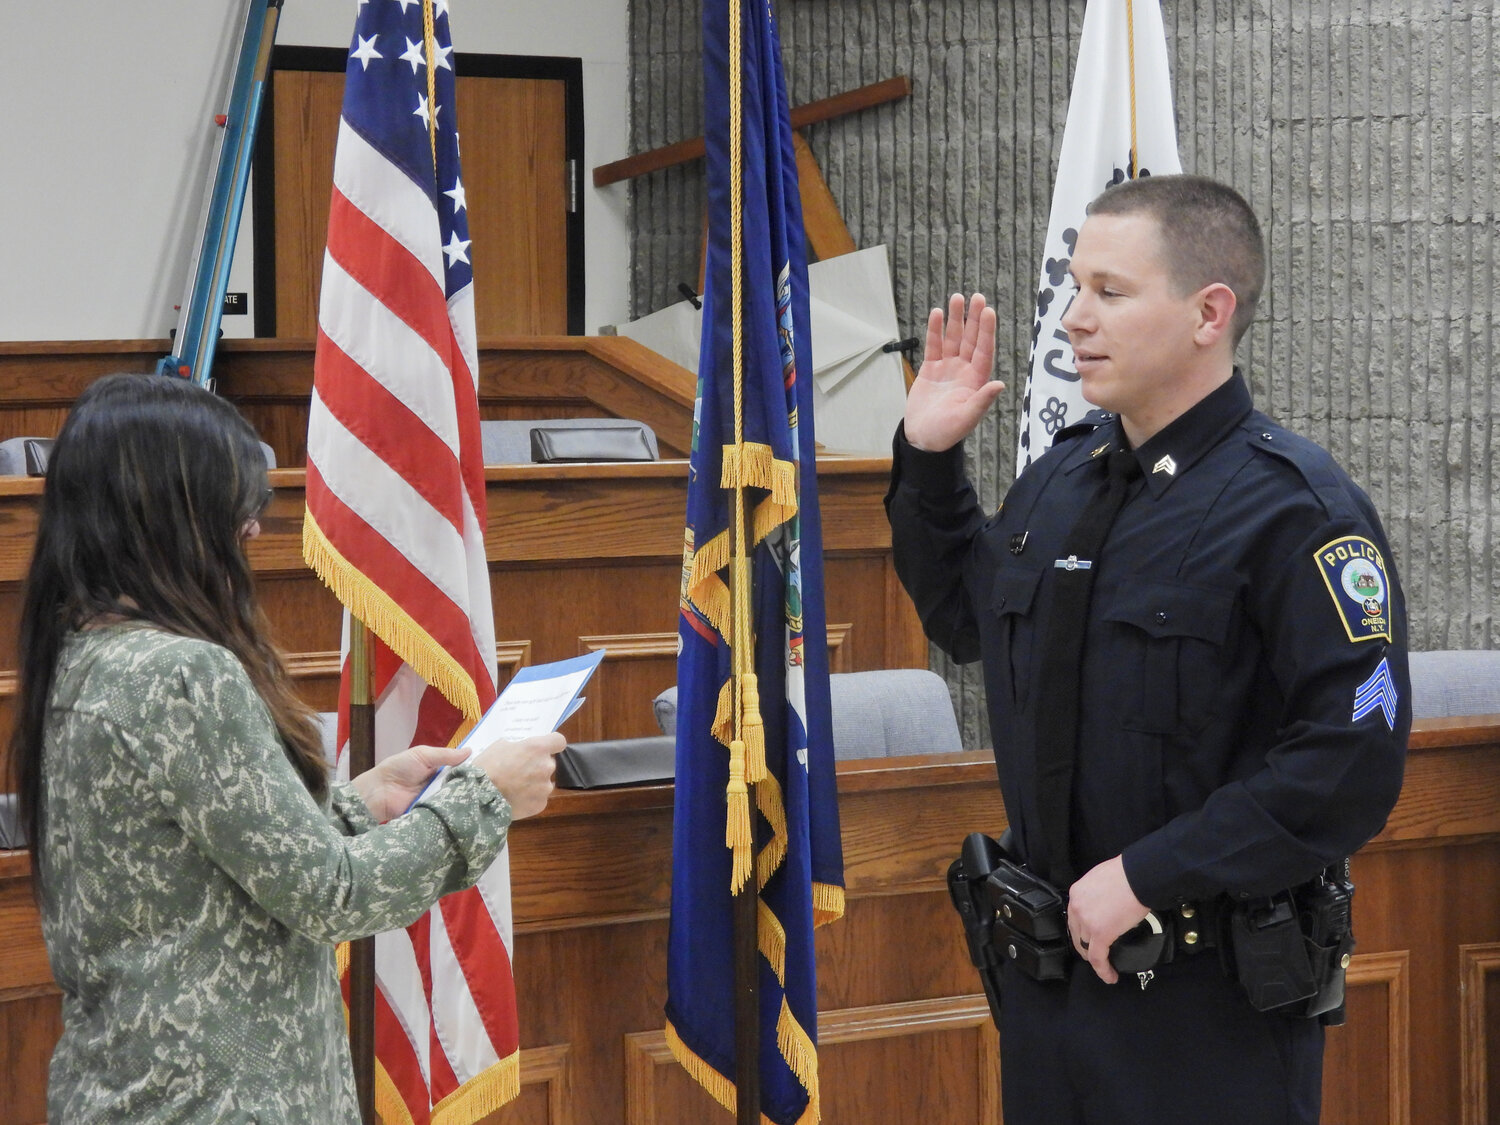 Sergeant Matthew Mosack takes takes his oath at a swearing-in ceremony in the Oneida Common Council on Thursday, March 9. Mosack joined the OPD as an intern in 2011 during high school. He graduated Utica College with a bachelor's degree in cybersecurity and information assurance, with a concentration in cybercrime investigation and forensics